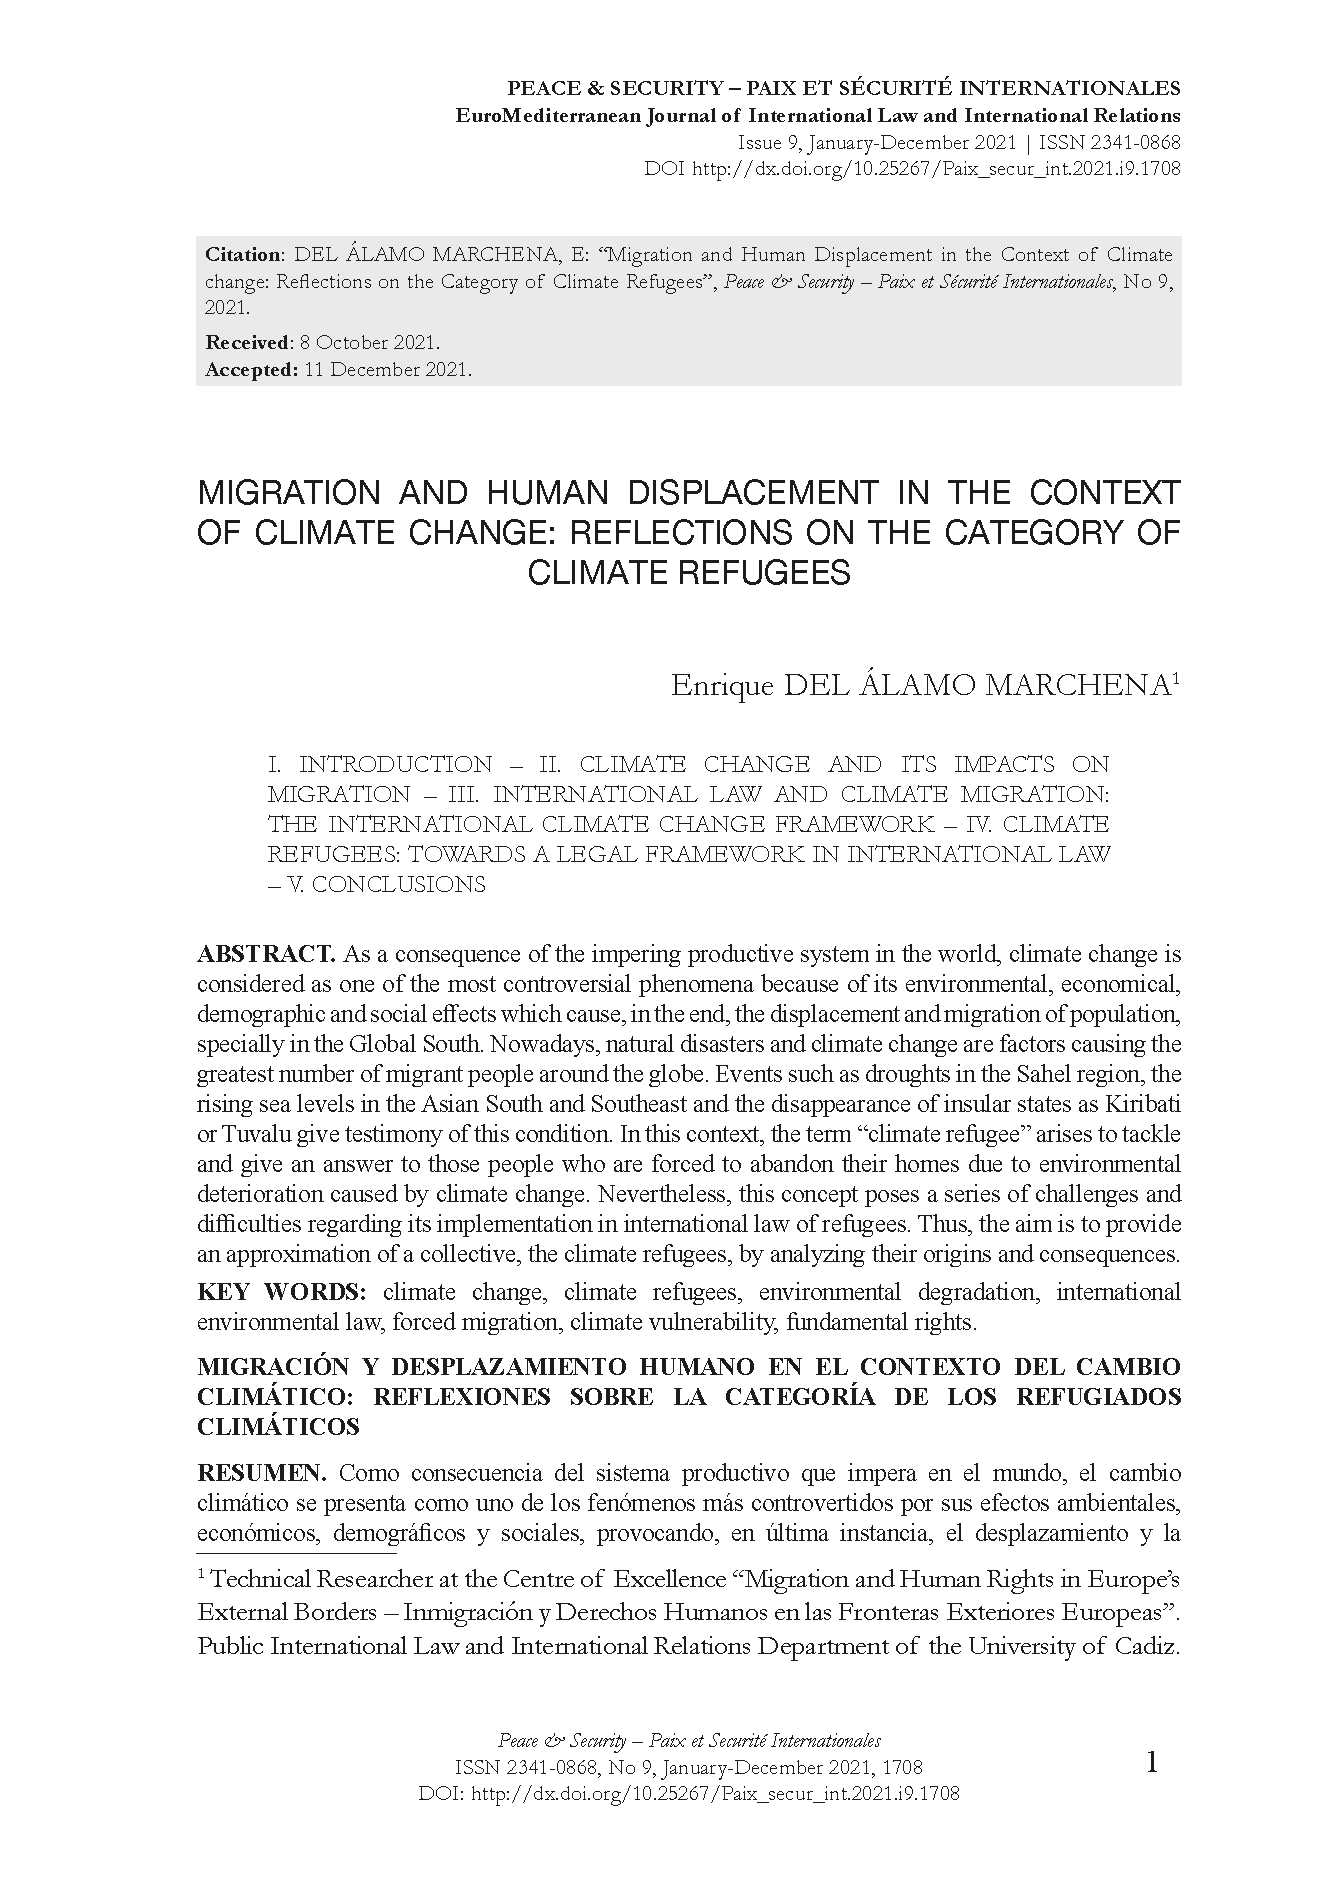 Migration and Human Displacement in the Context of Climate change: Reflections on the Category of Climate Refugees